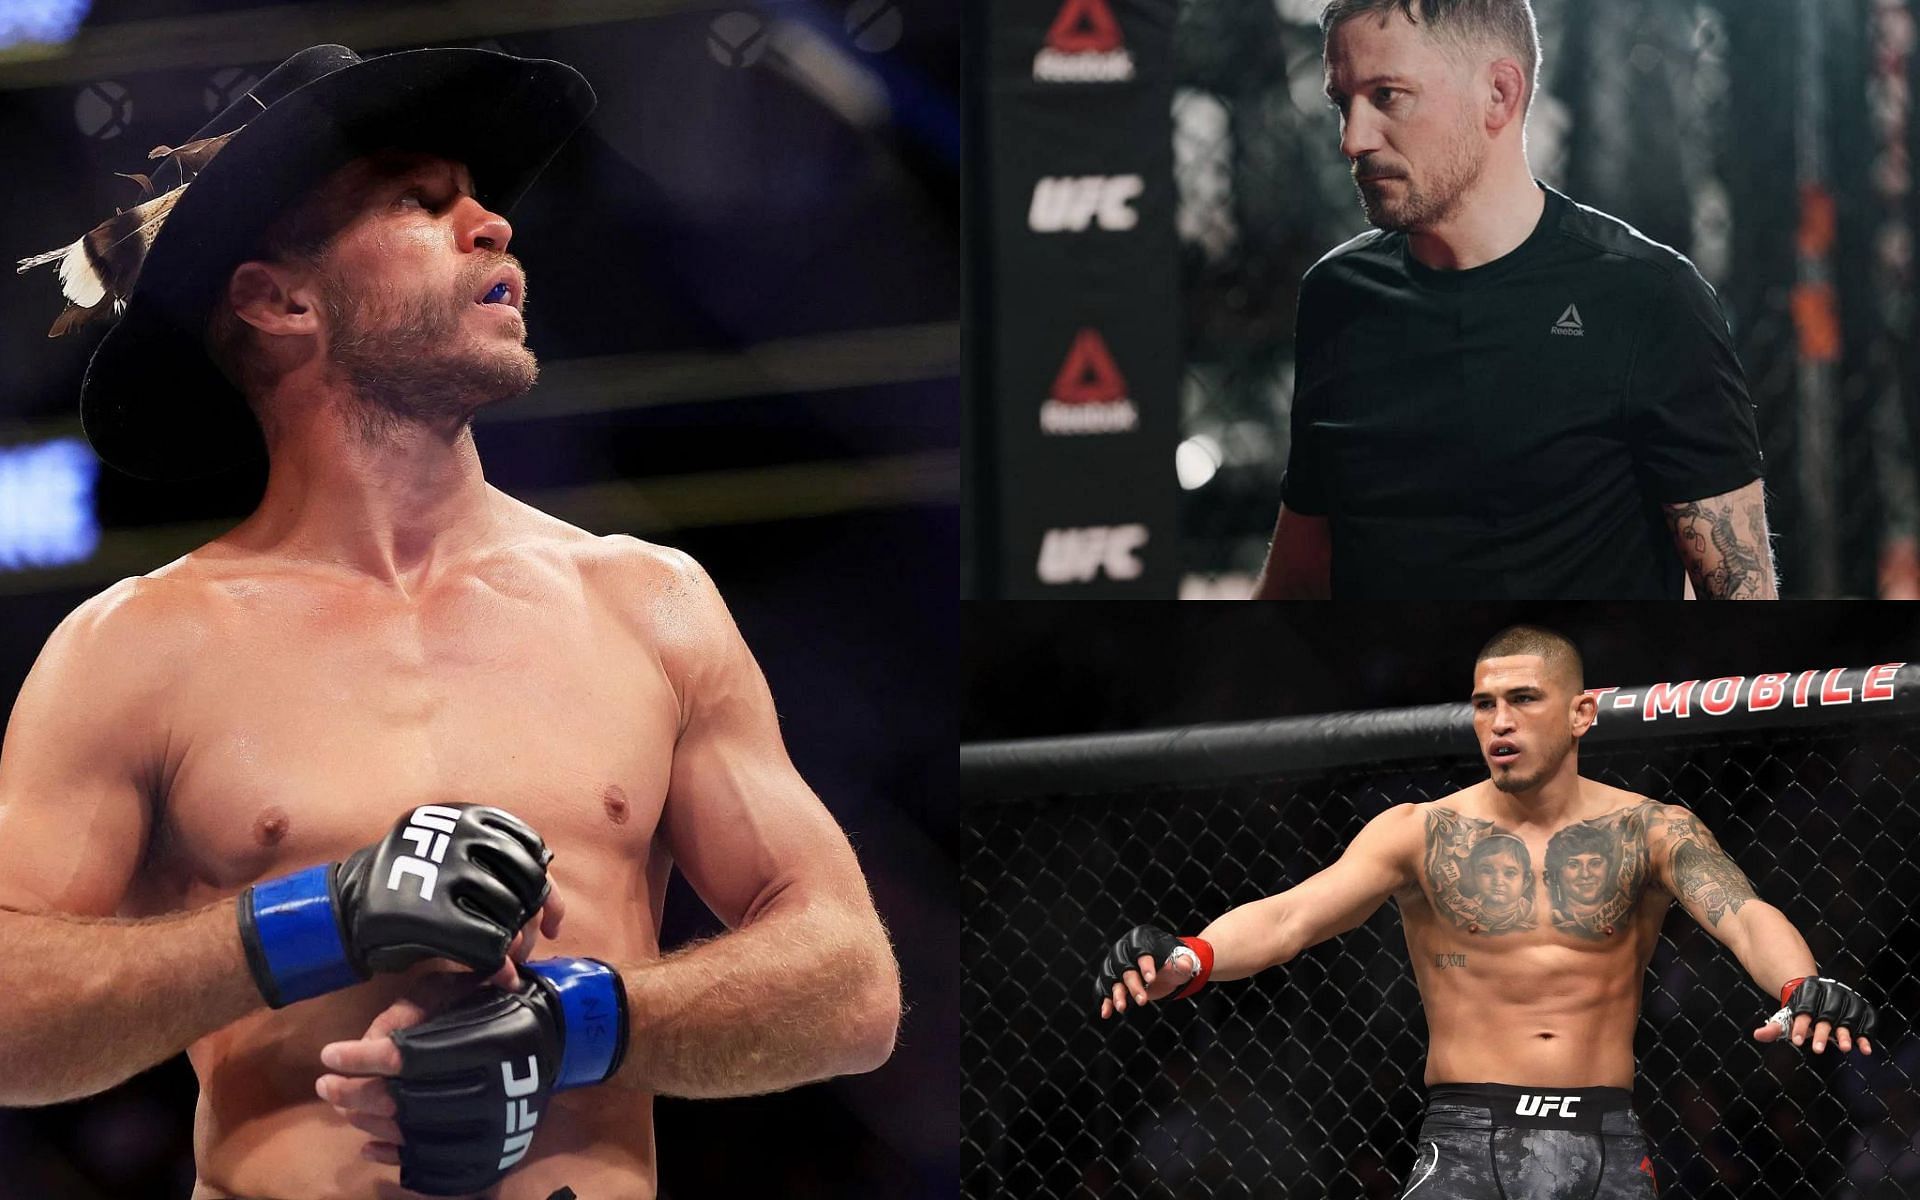 Donald Cerrone (Left), John Kavanagh (Top Right), and Anthony Pettis (Bottom Right) (Images courtesy of Getty and @coach_kavanagh Instagram)